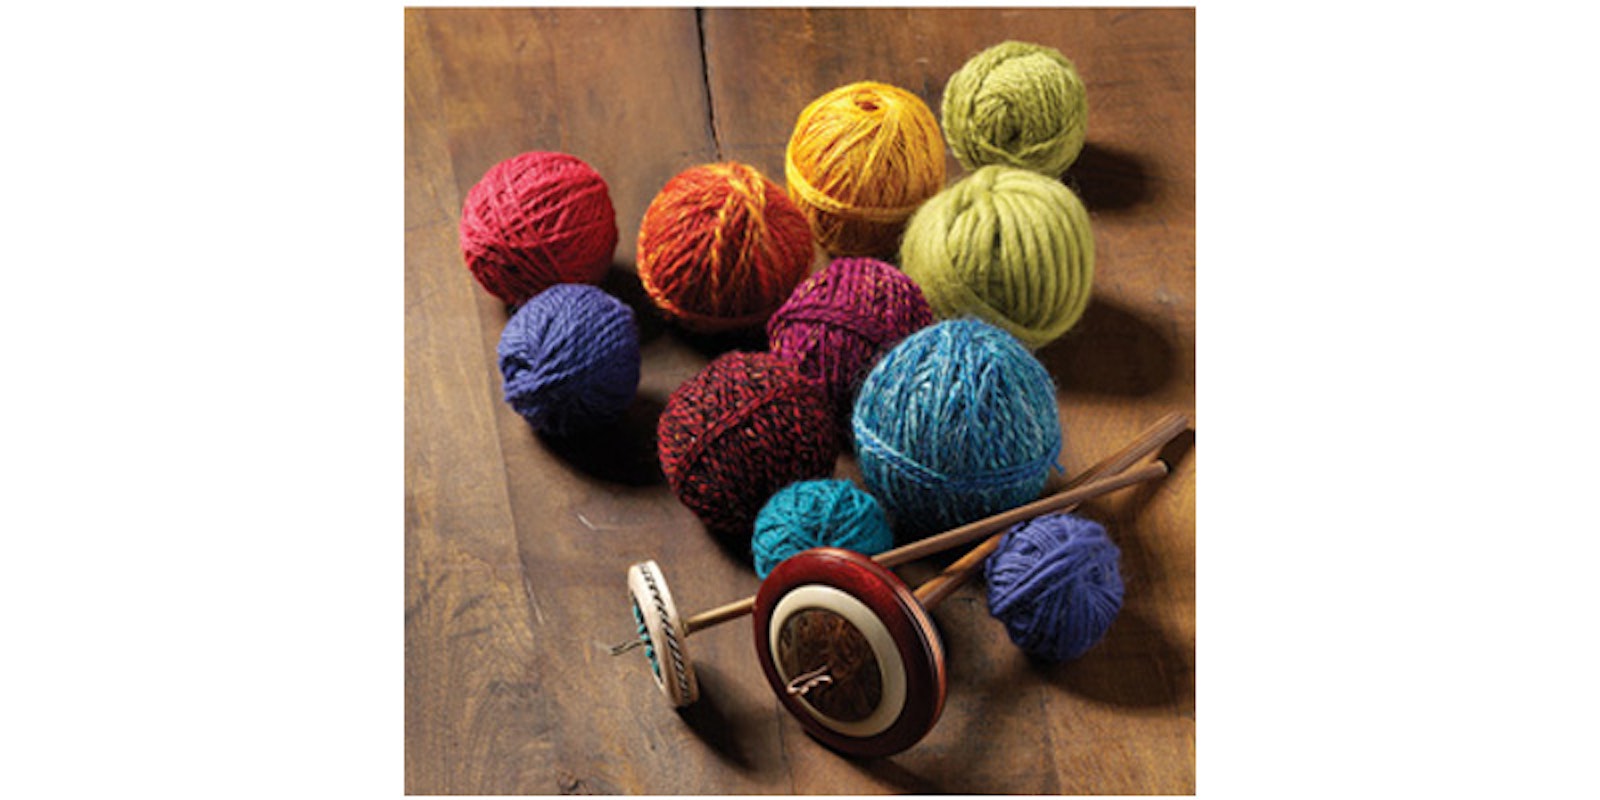 LEARN TO SPIN YOUR OWN YARN